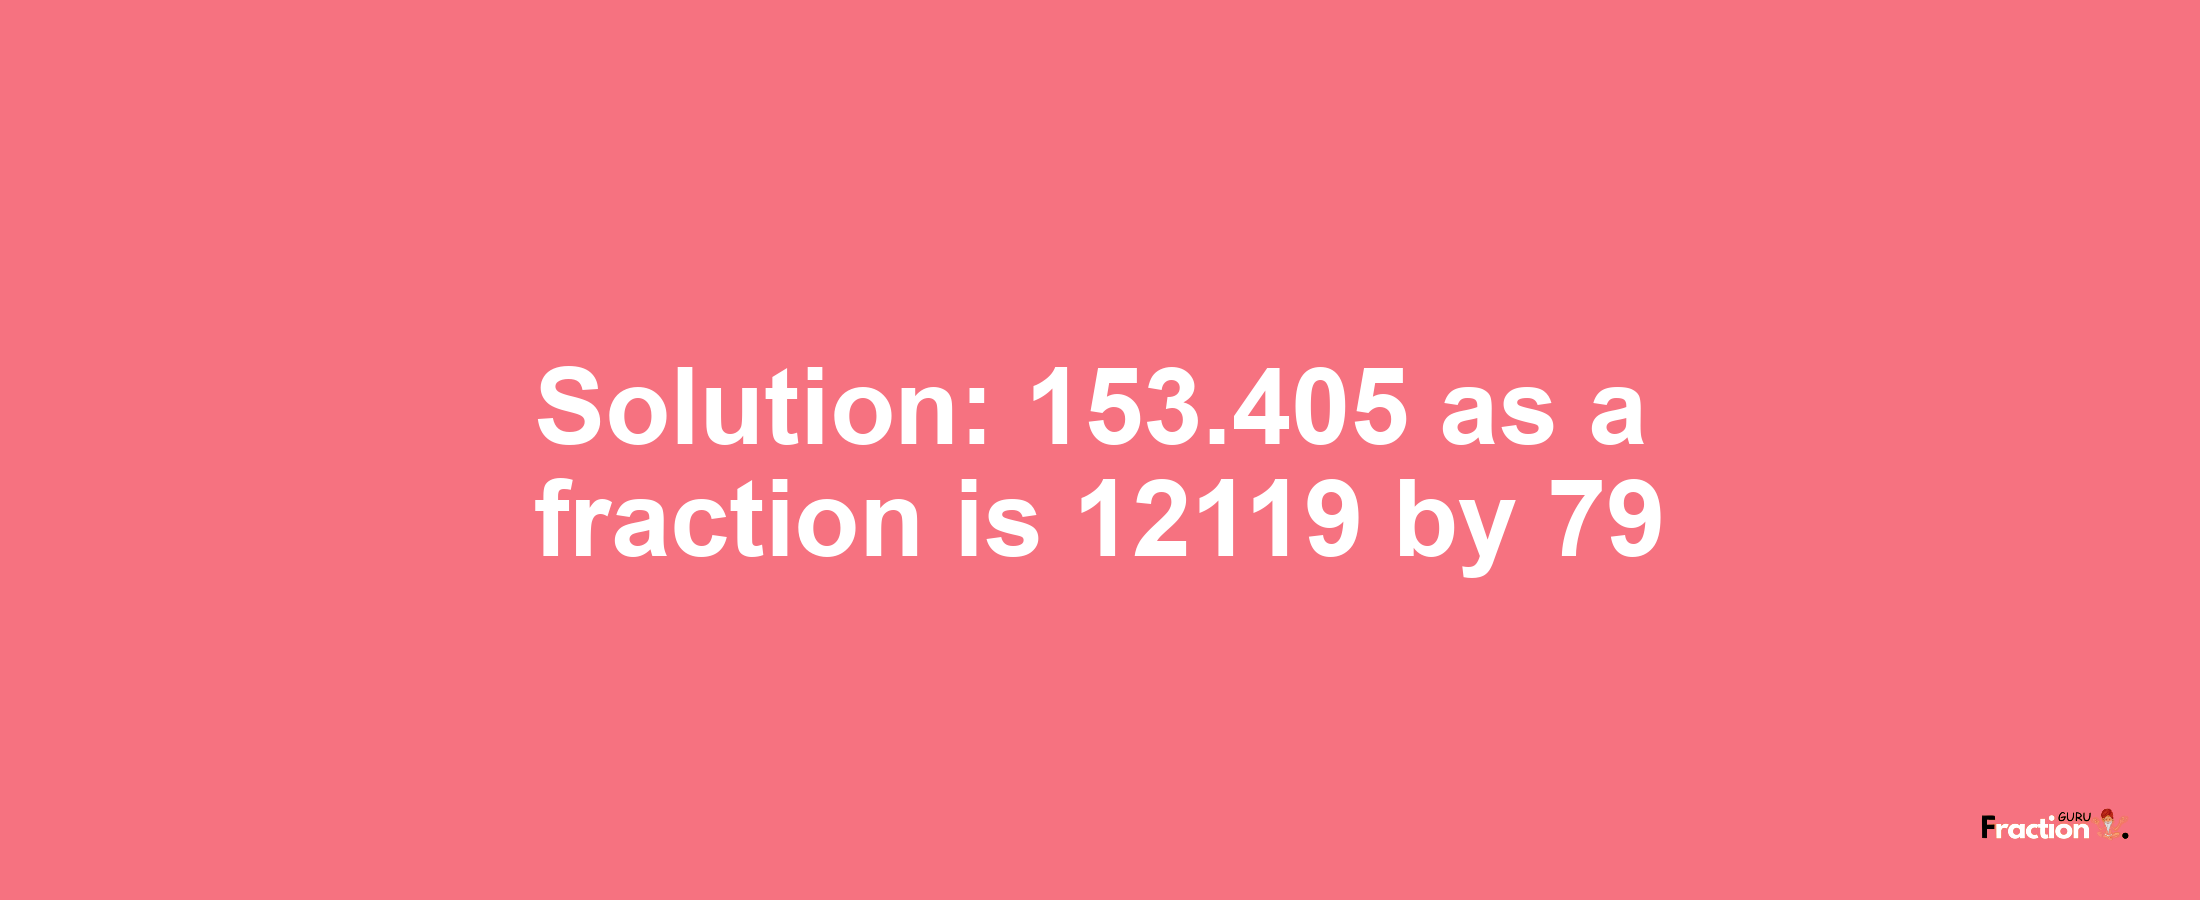 Solution:153.405 as a fraction is 12119/79